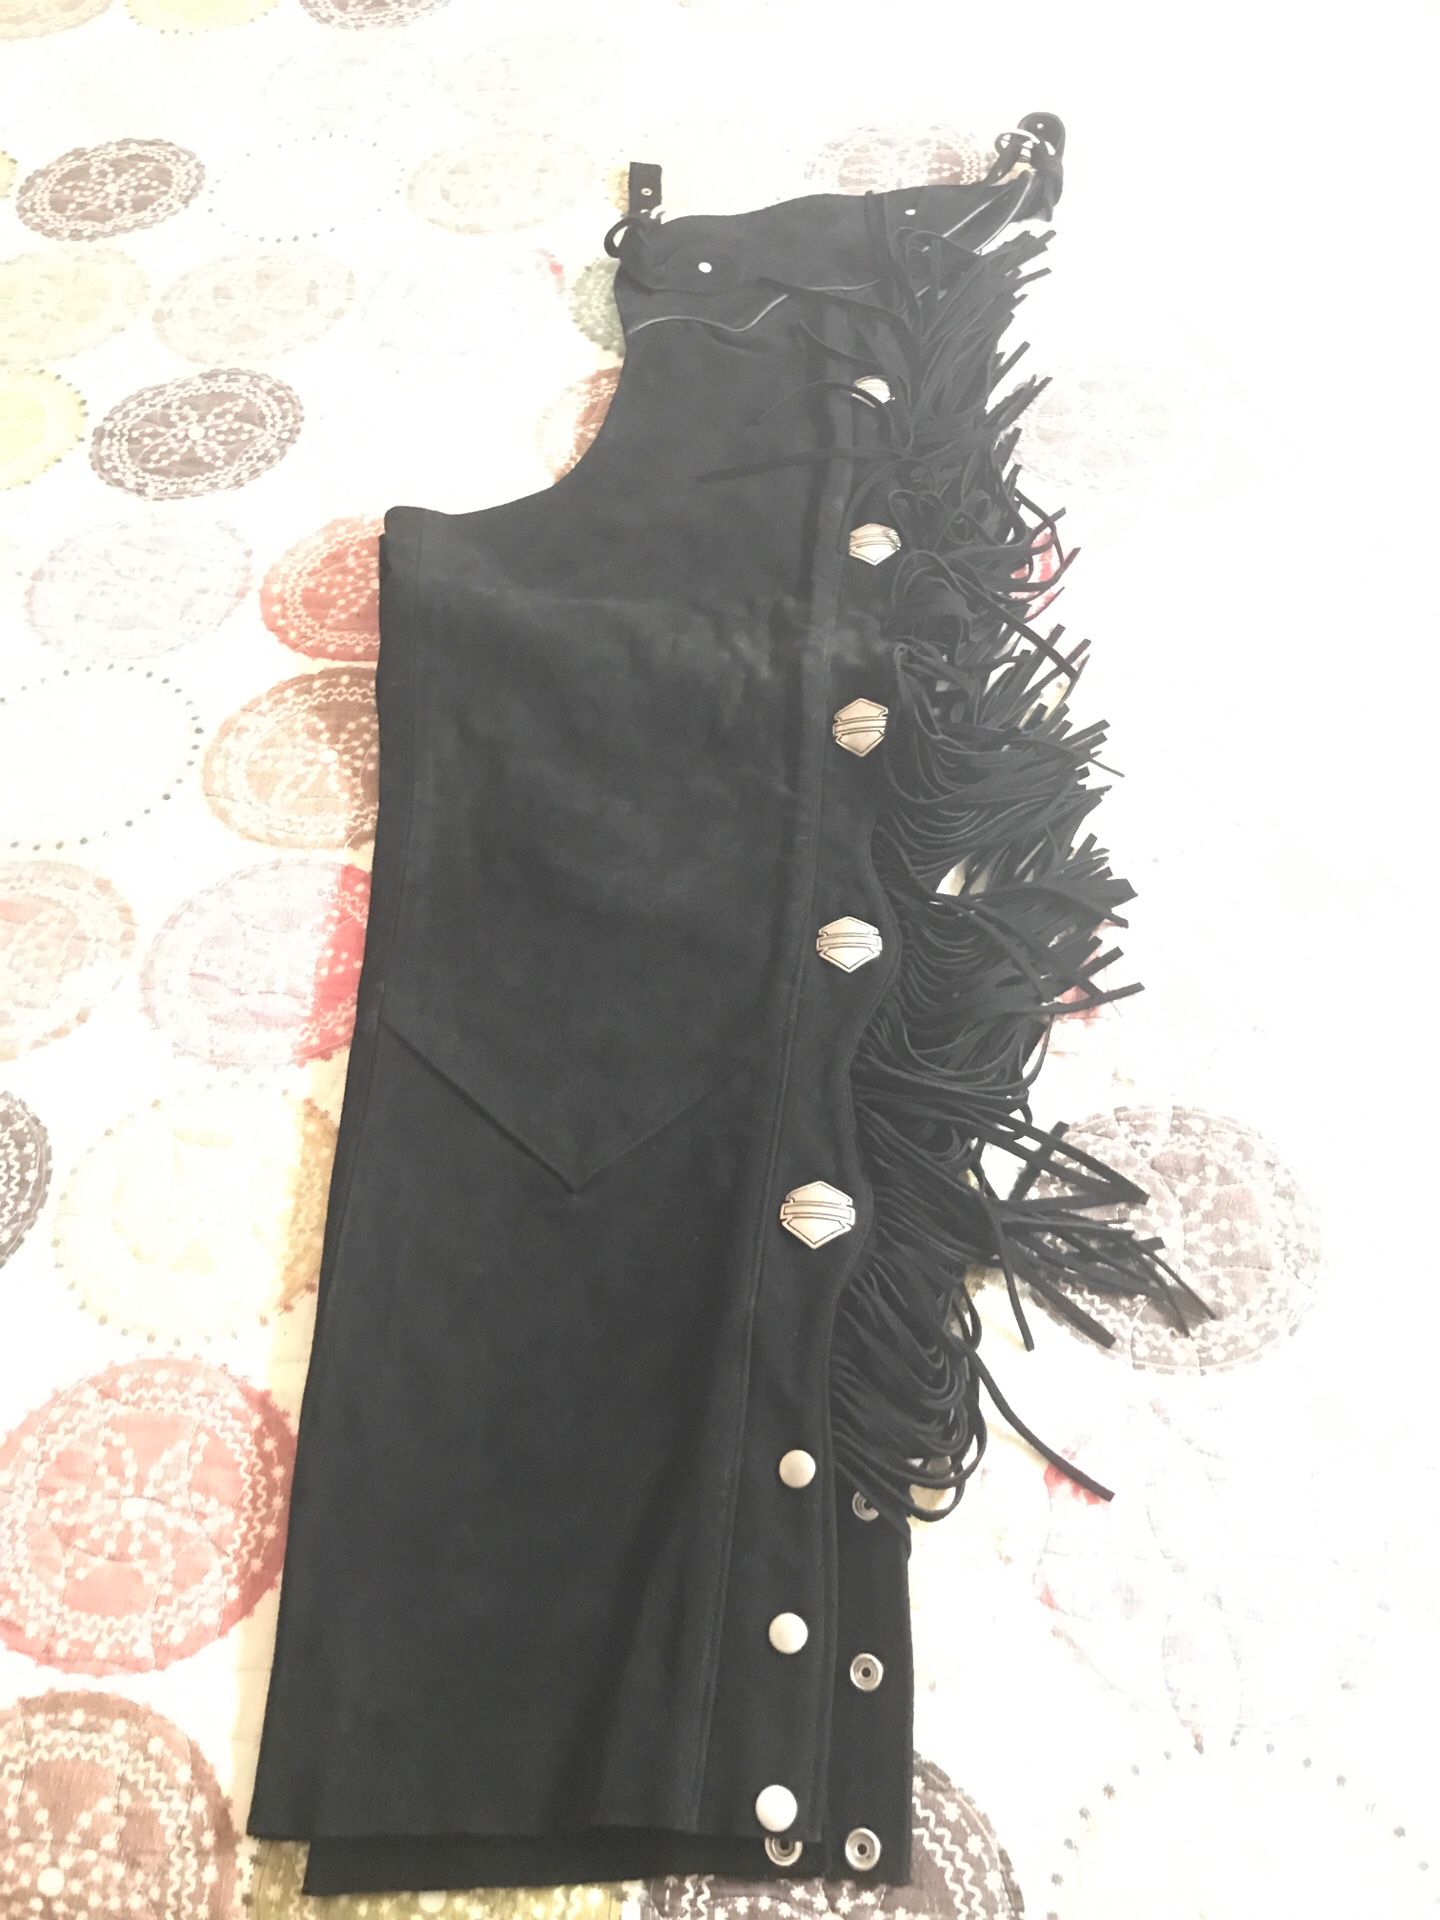 Harley Davidson black suede fringed chaps with bar & shield conches.